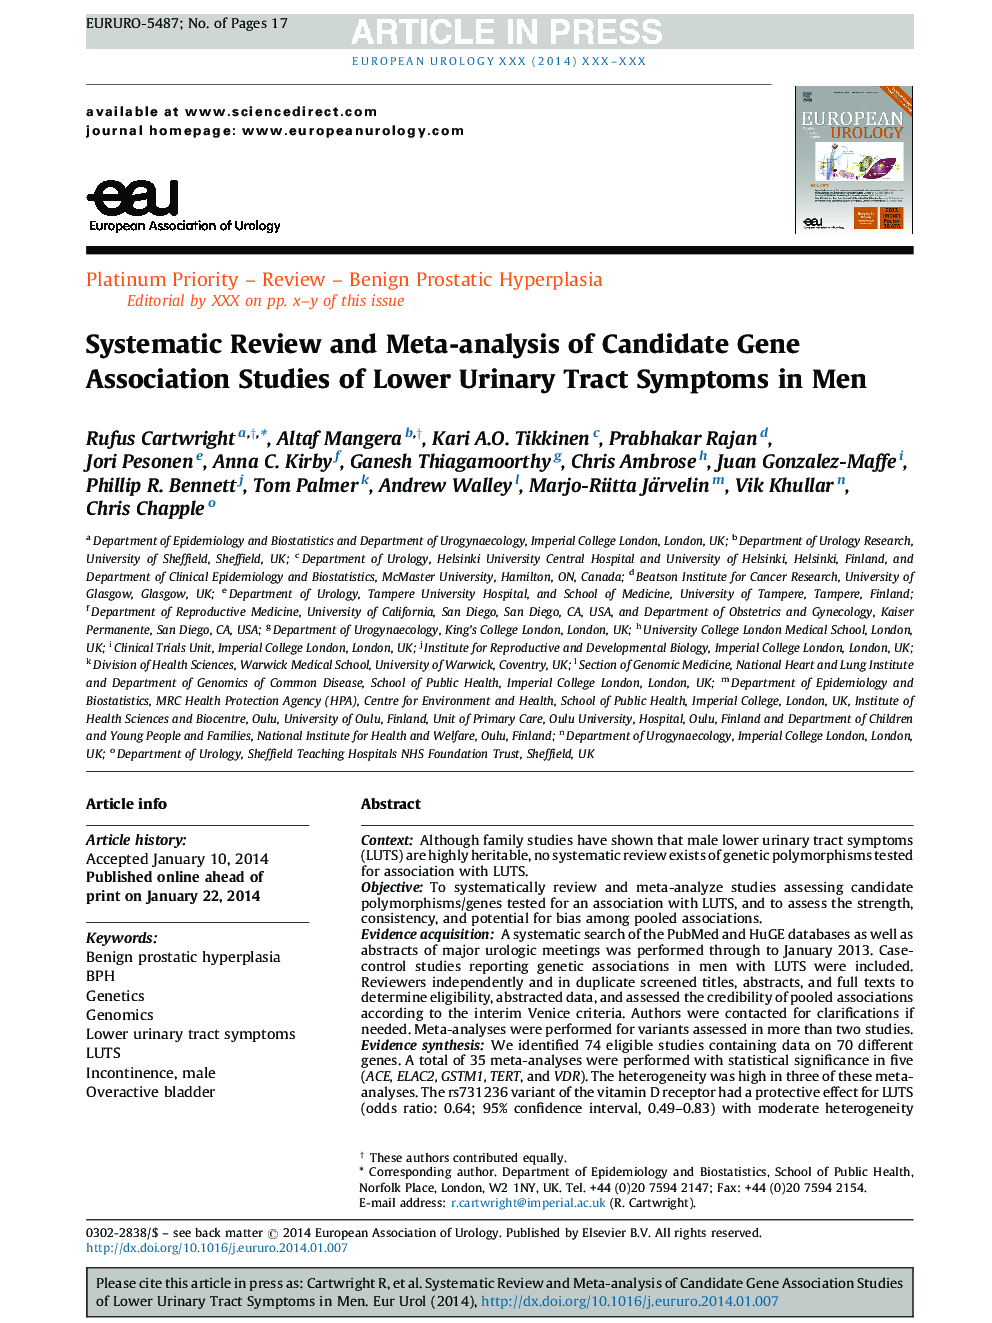 Systematic Review and Meta-analysis of Candidate Gene Association Studies of Lower Urinary Tract Symptoms in Men